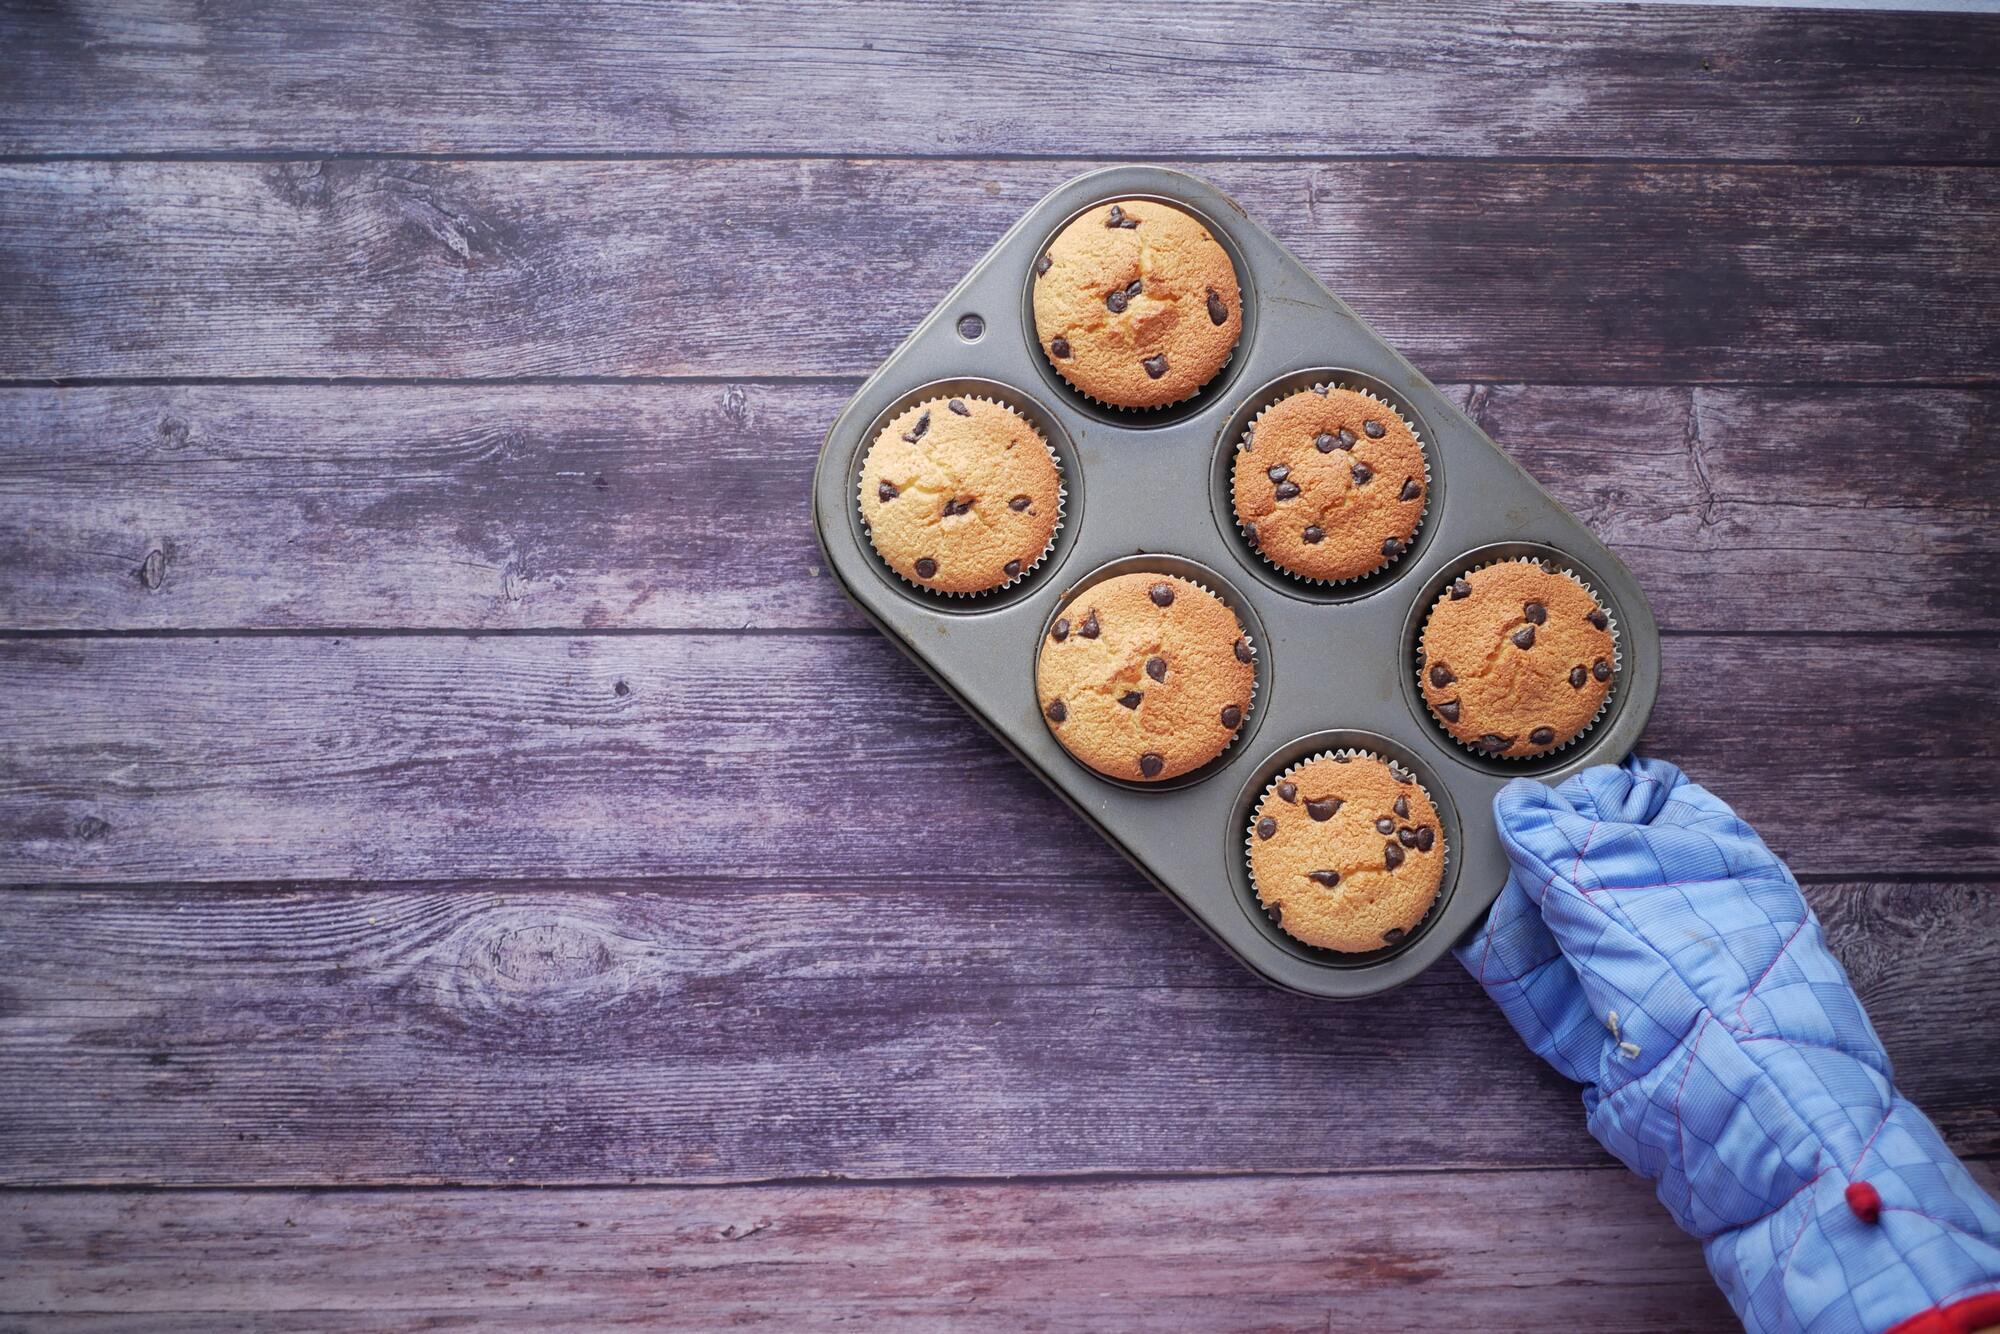 How to make delicious muffins at home